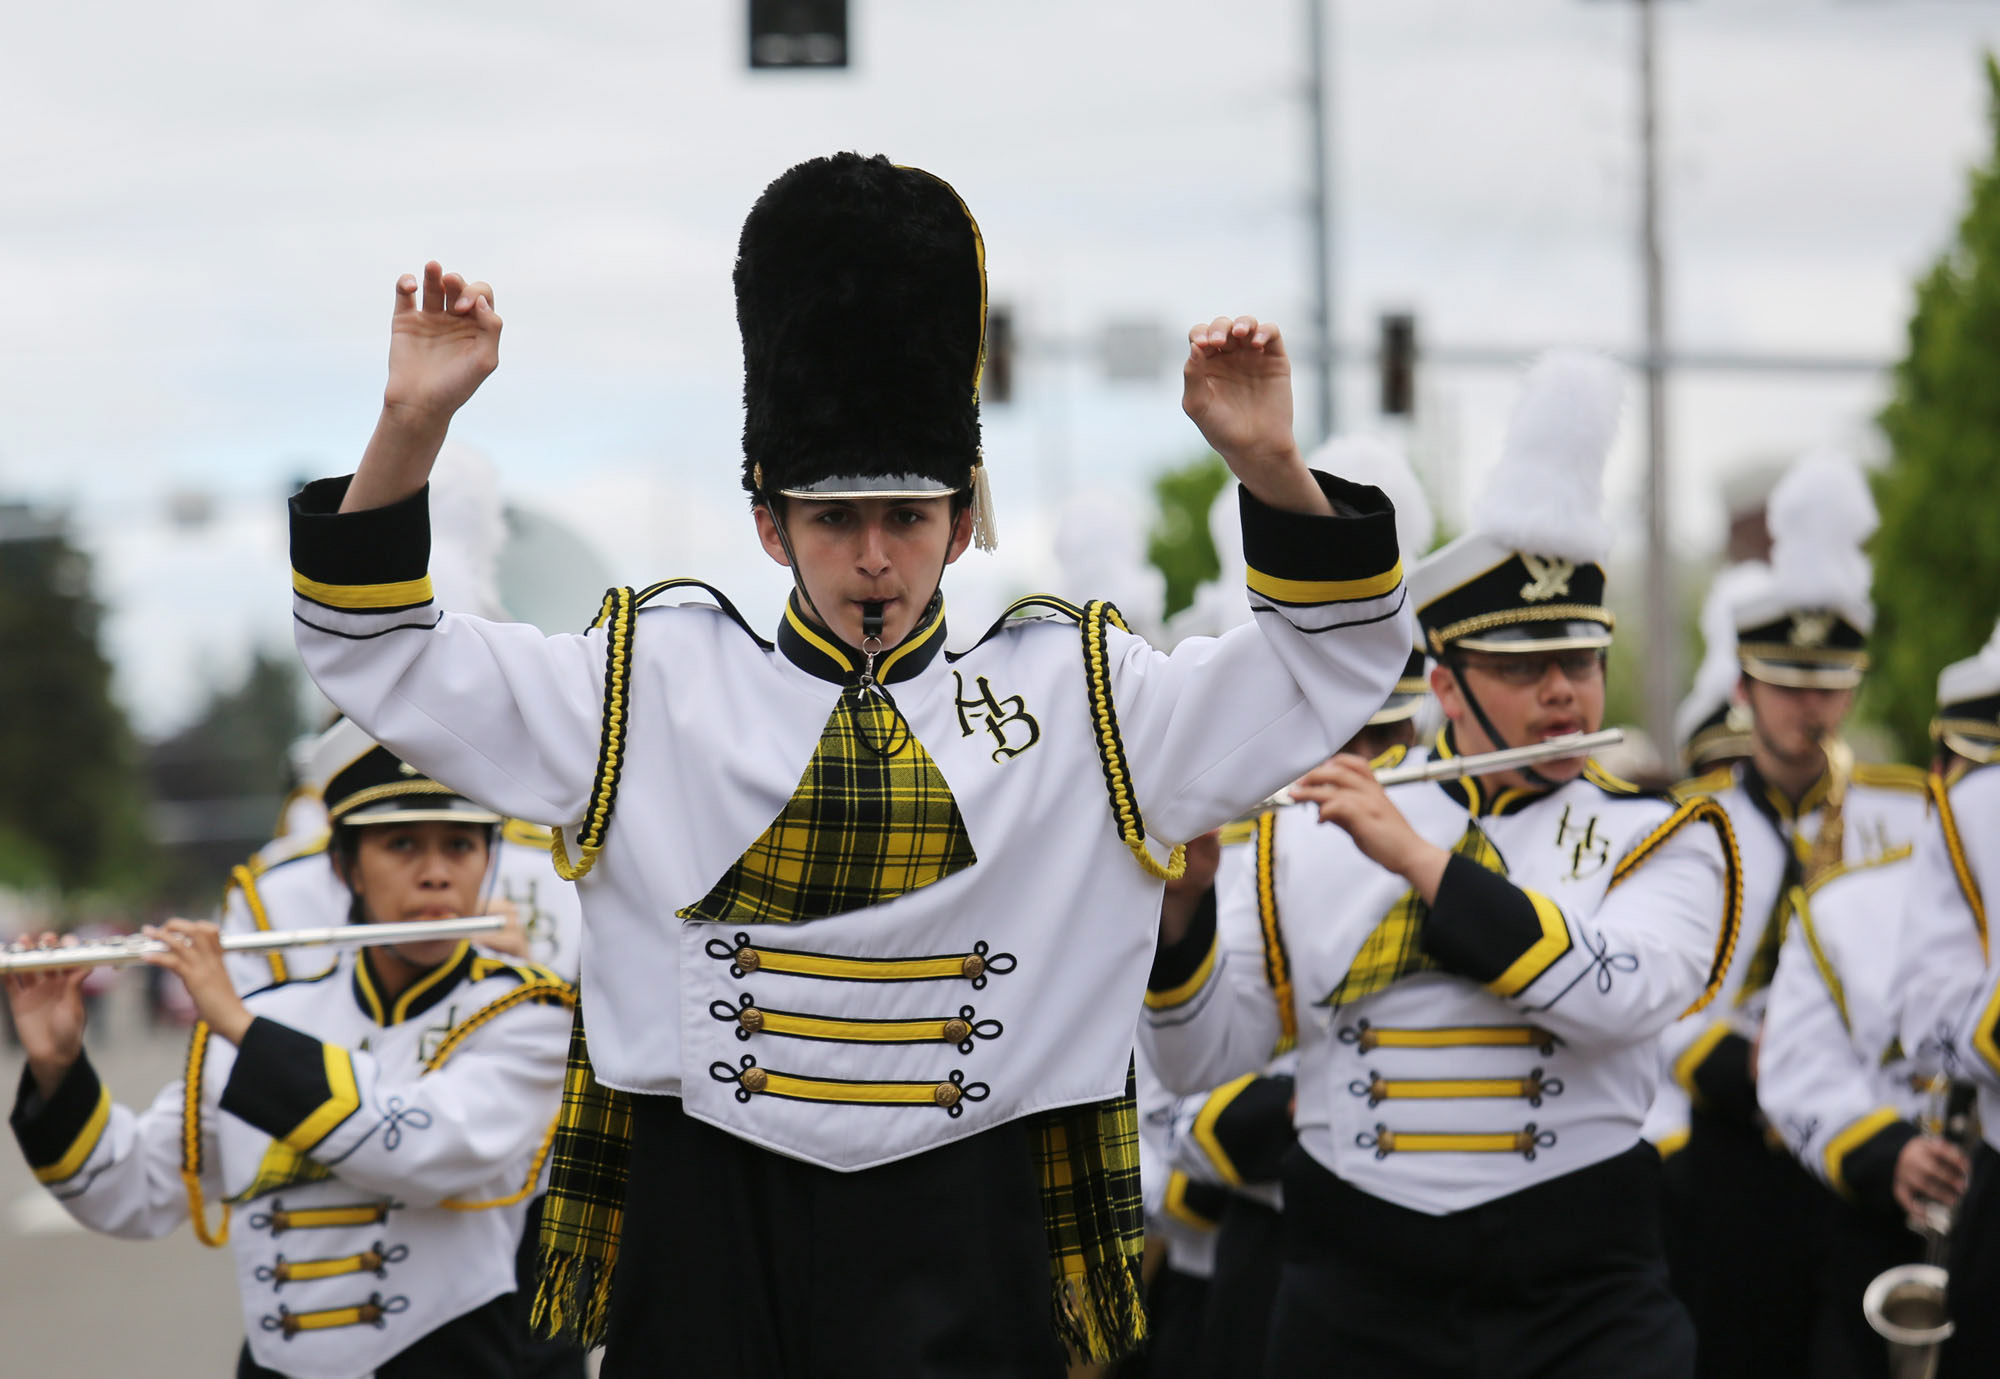 The Hudson Bay marching band takes part in the annual Hazel Dell parade Saturday.